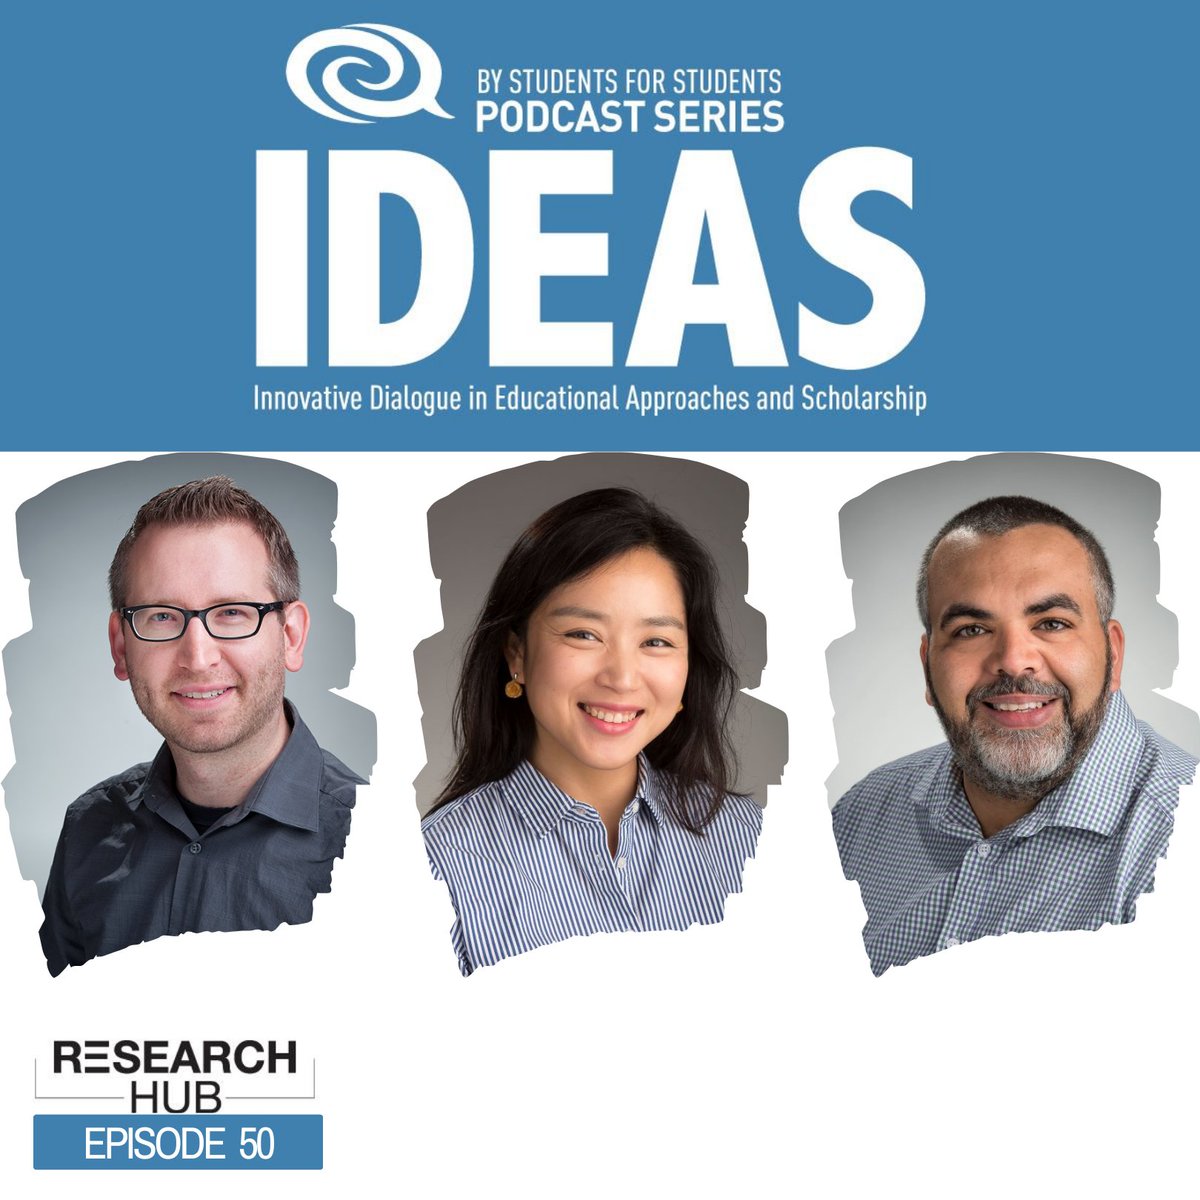 (Out Now!) Join us in celebrating the 50th episode of IDEAS! Don't miss this special episode featuring a captivating panel discussion with Dr. @joelhenghartse, Dr. Bong-gi Sohn and PhD Candidate @plsantos_br! Listen here: bit.ly/IdeasPodcastSFU